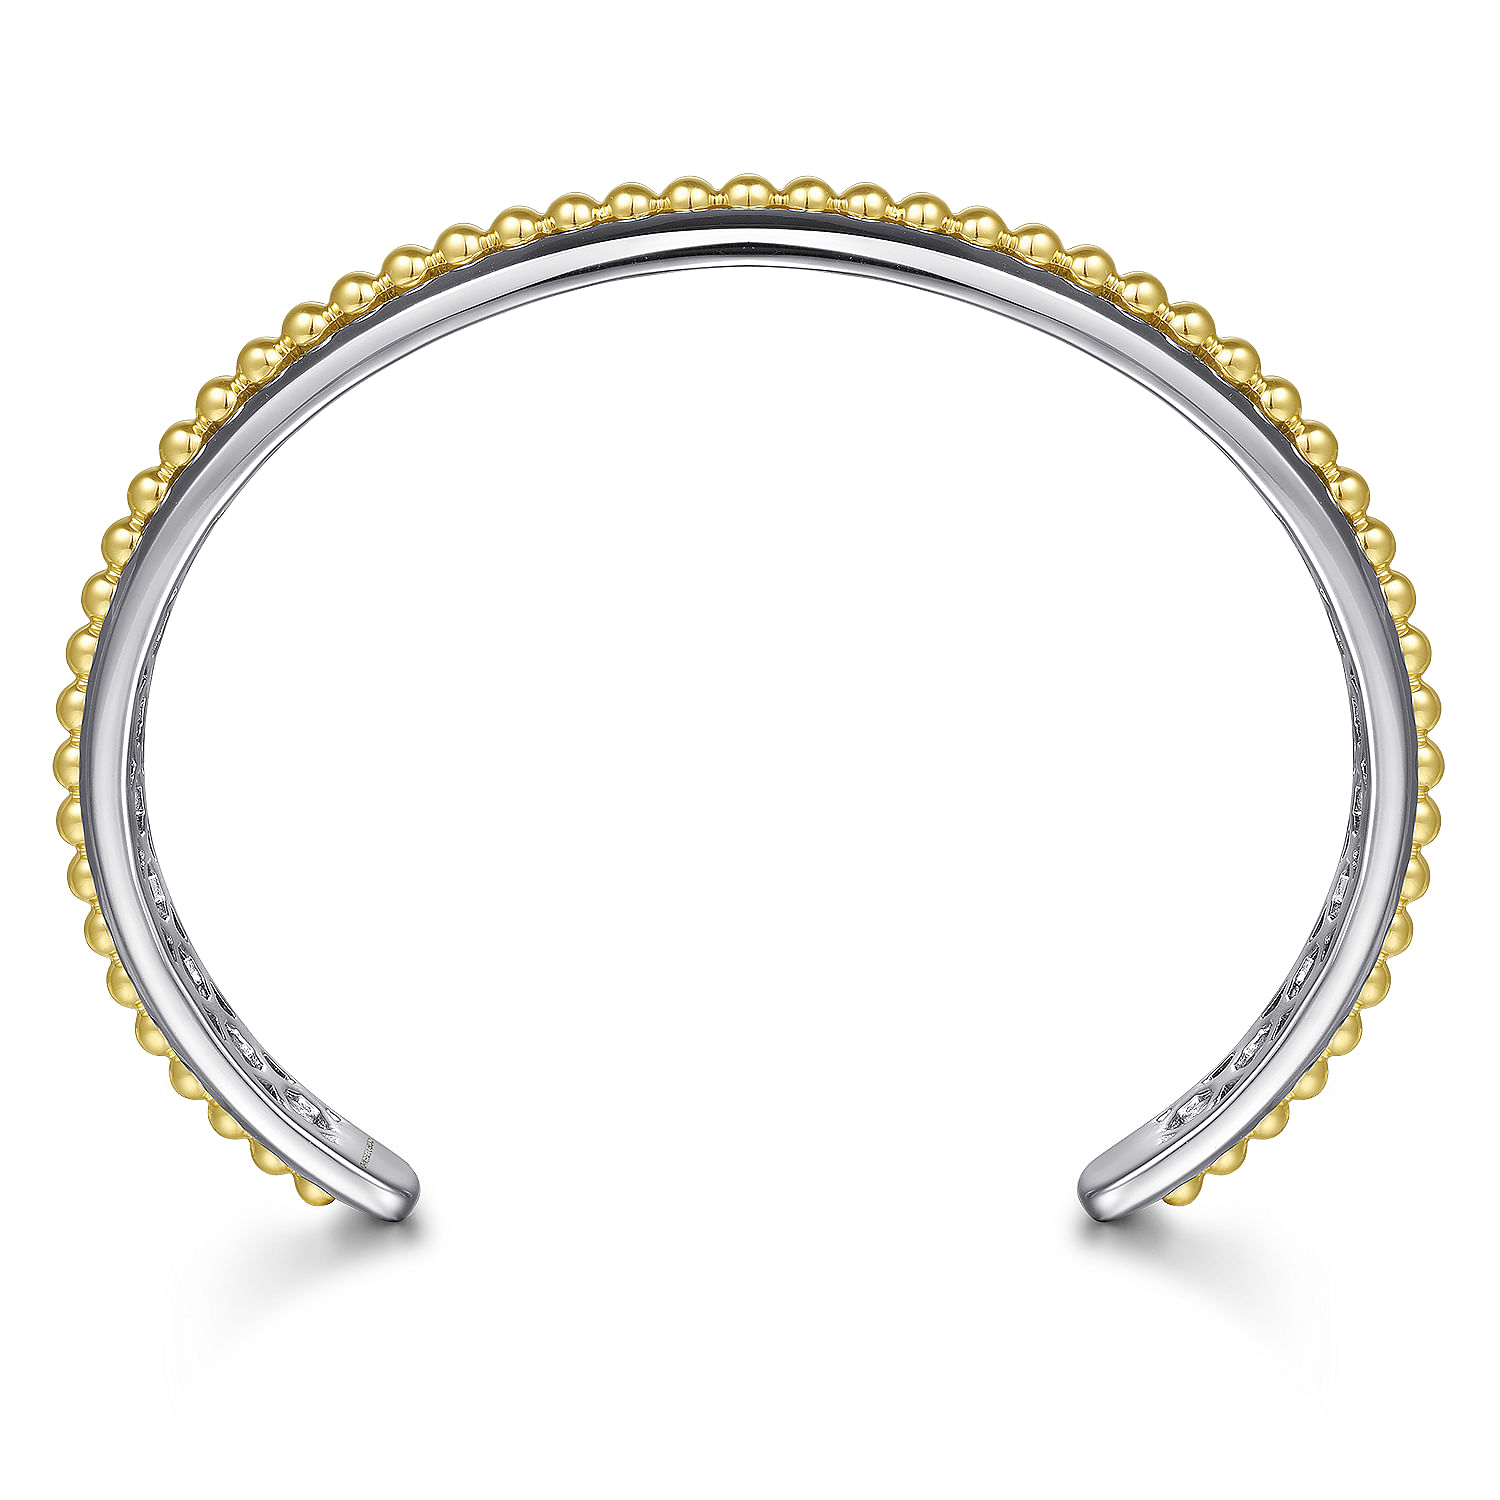 925 Sterling Silver Open Cuff Bracelet with 14K Yellow Gold Beads